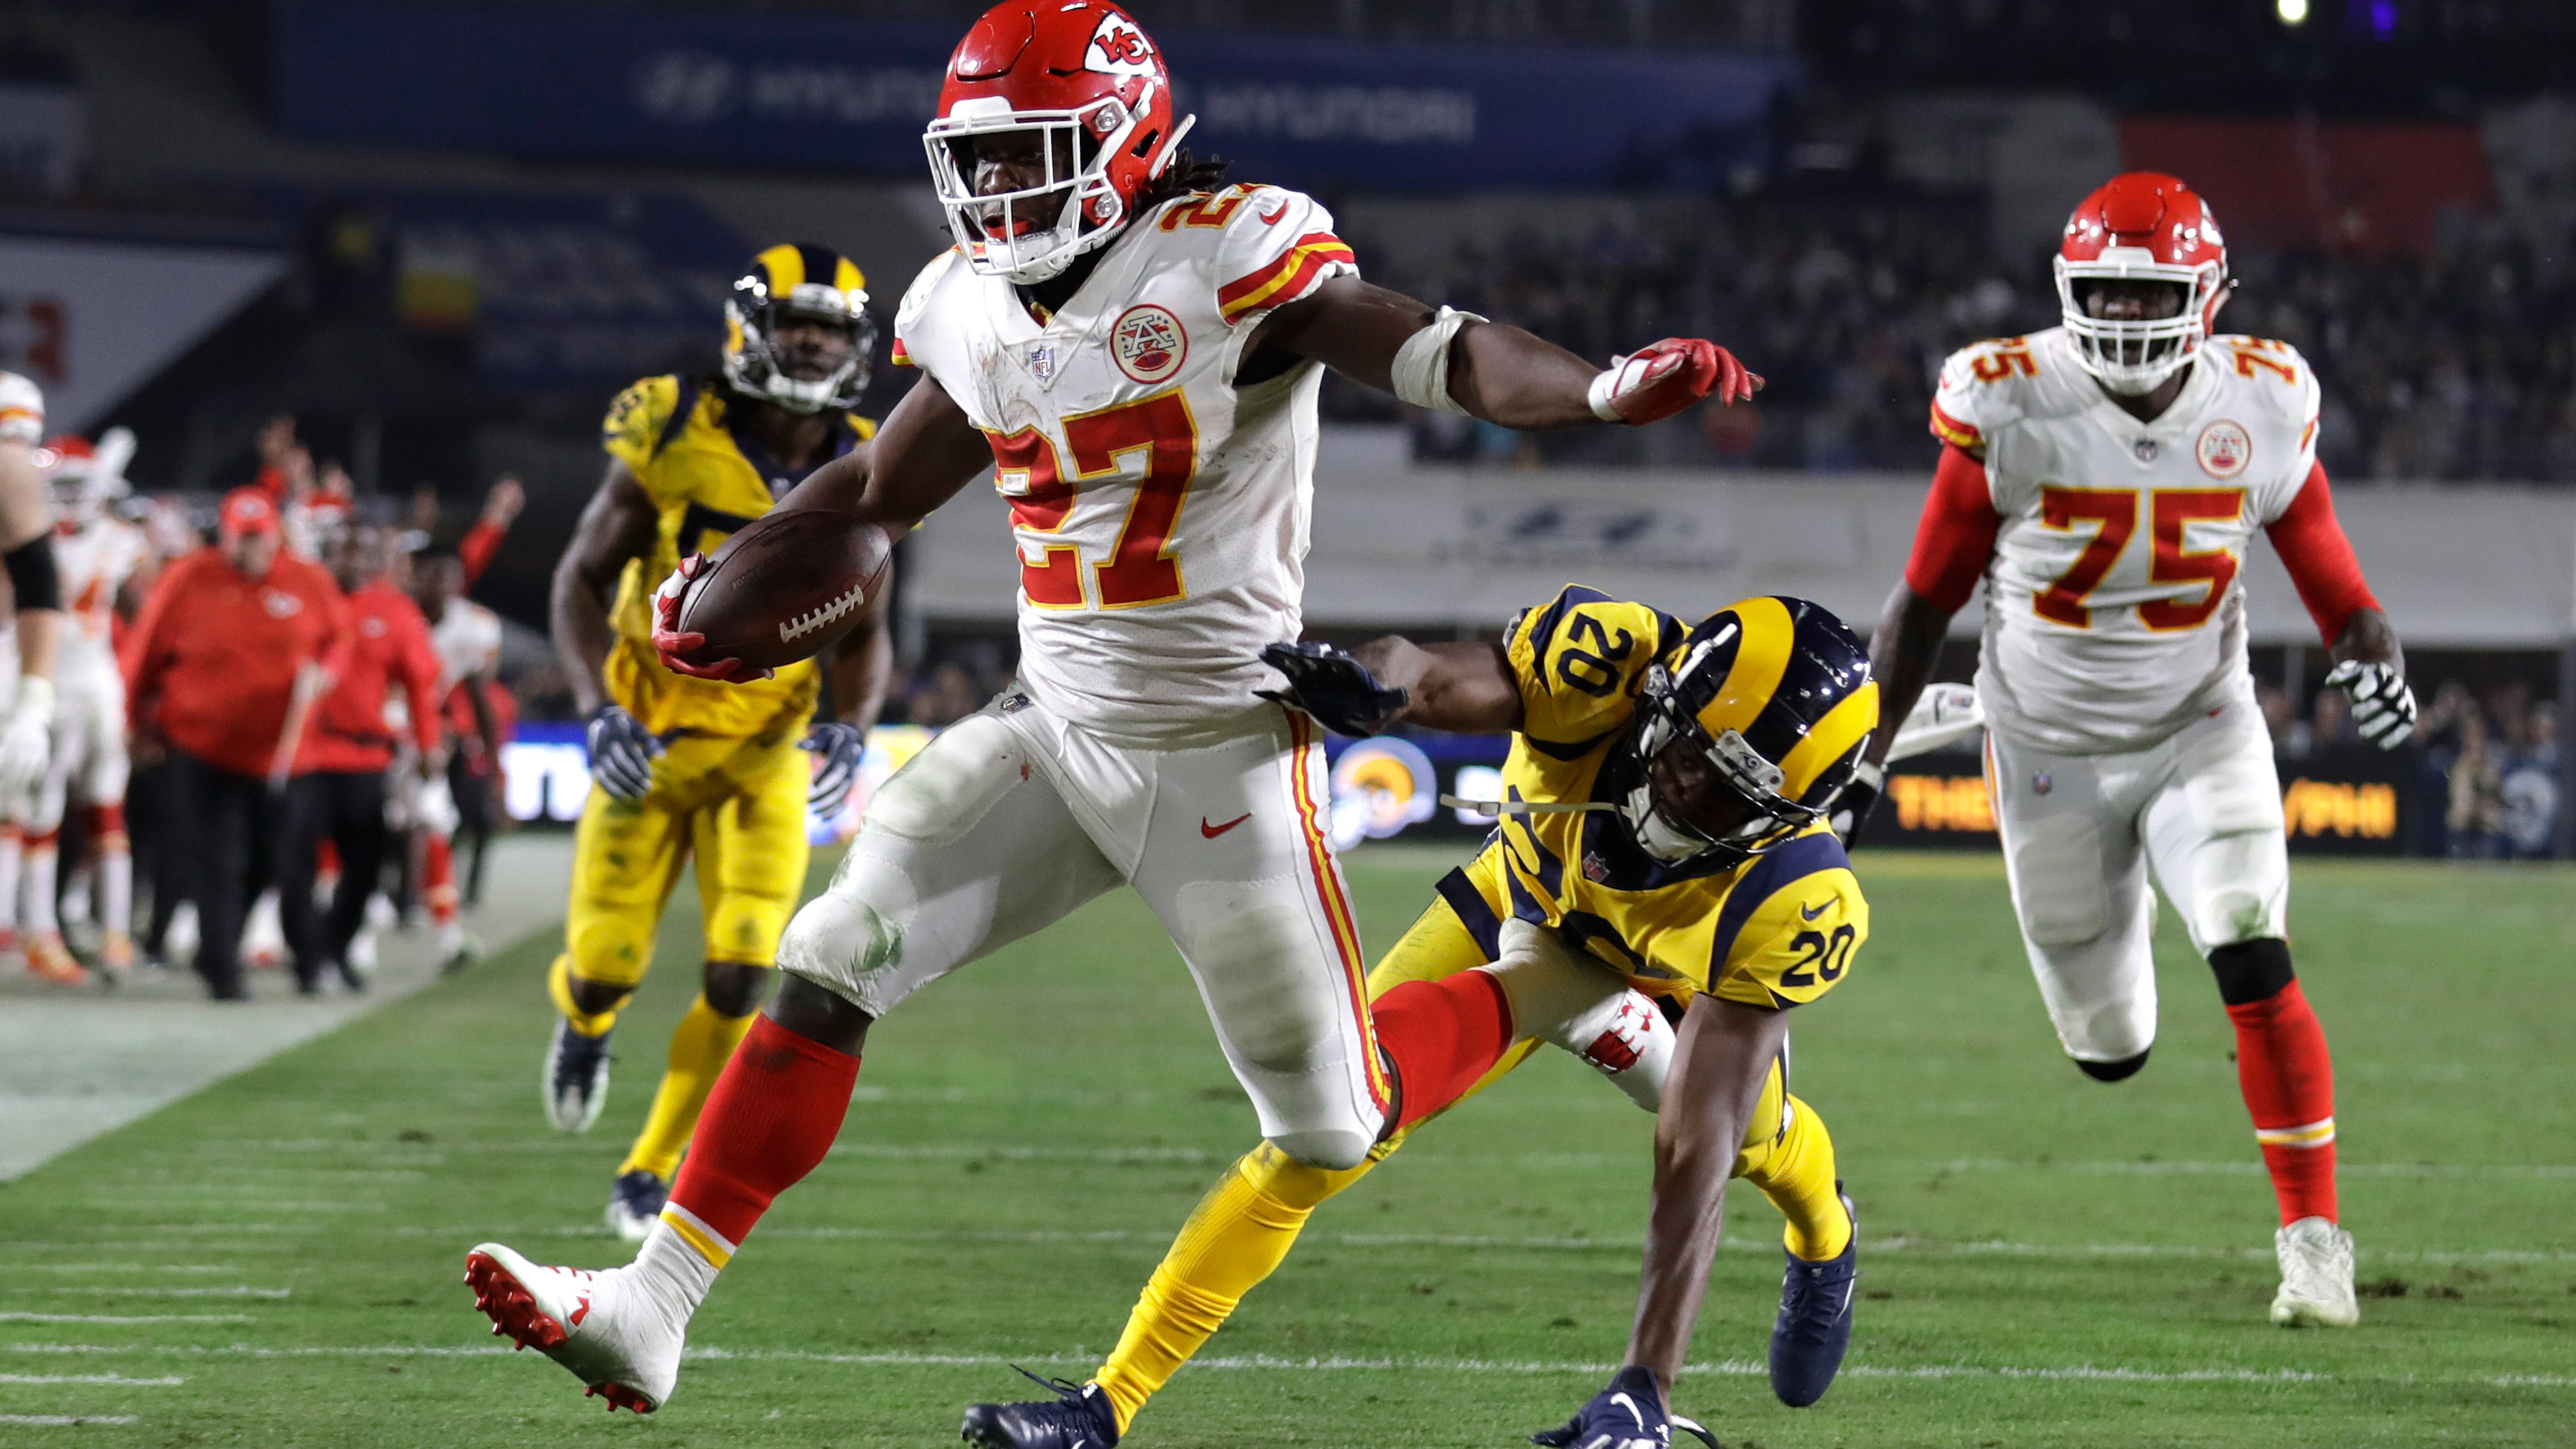 Glaring mistakes aside, Chiefs gain confidence in shootout loss to Rams